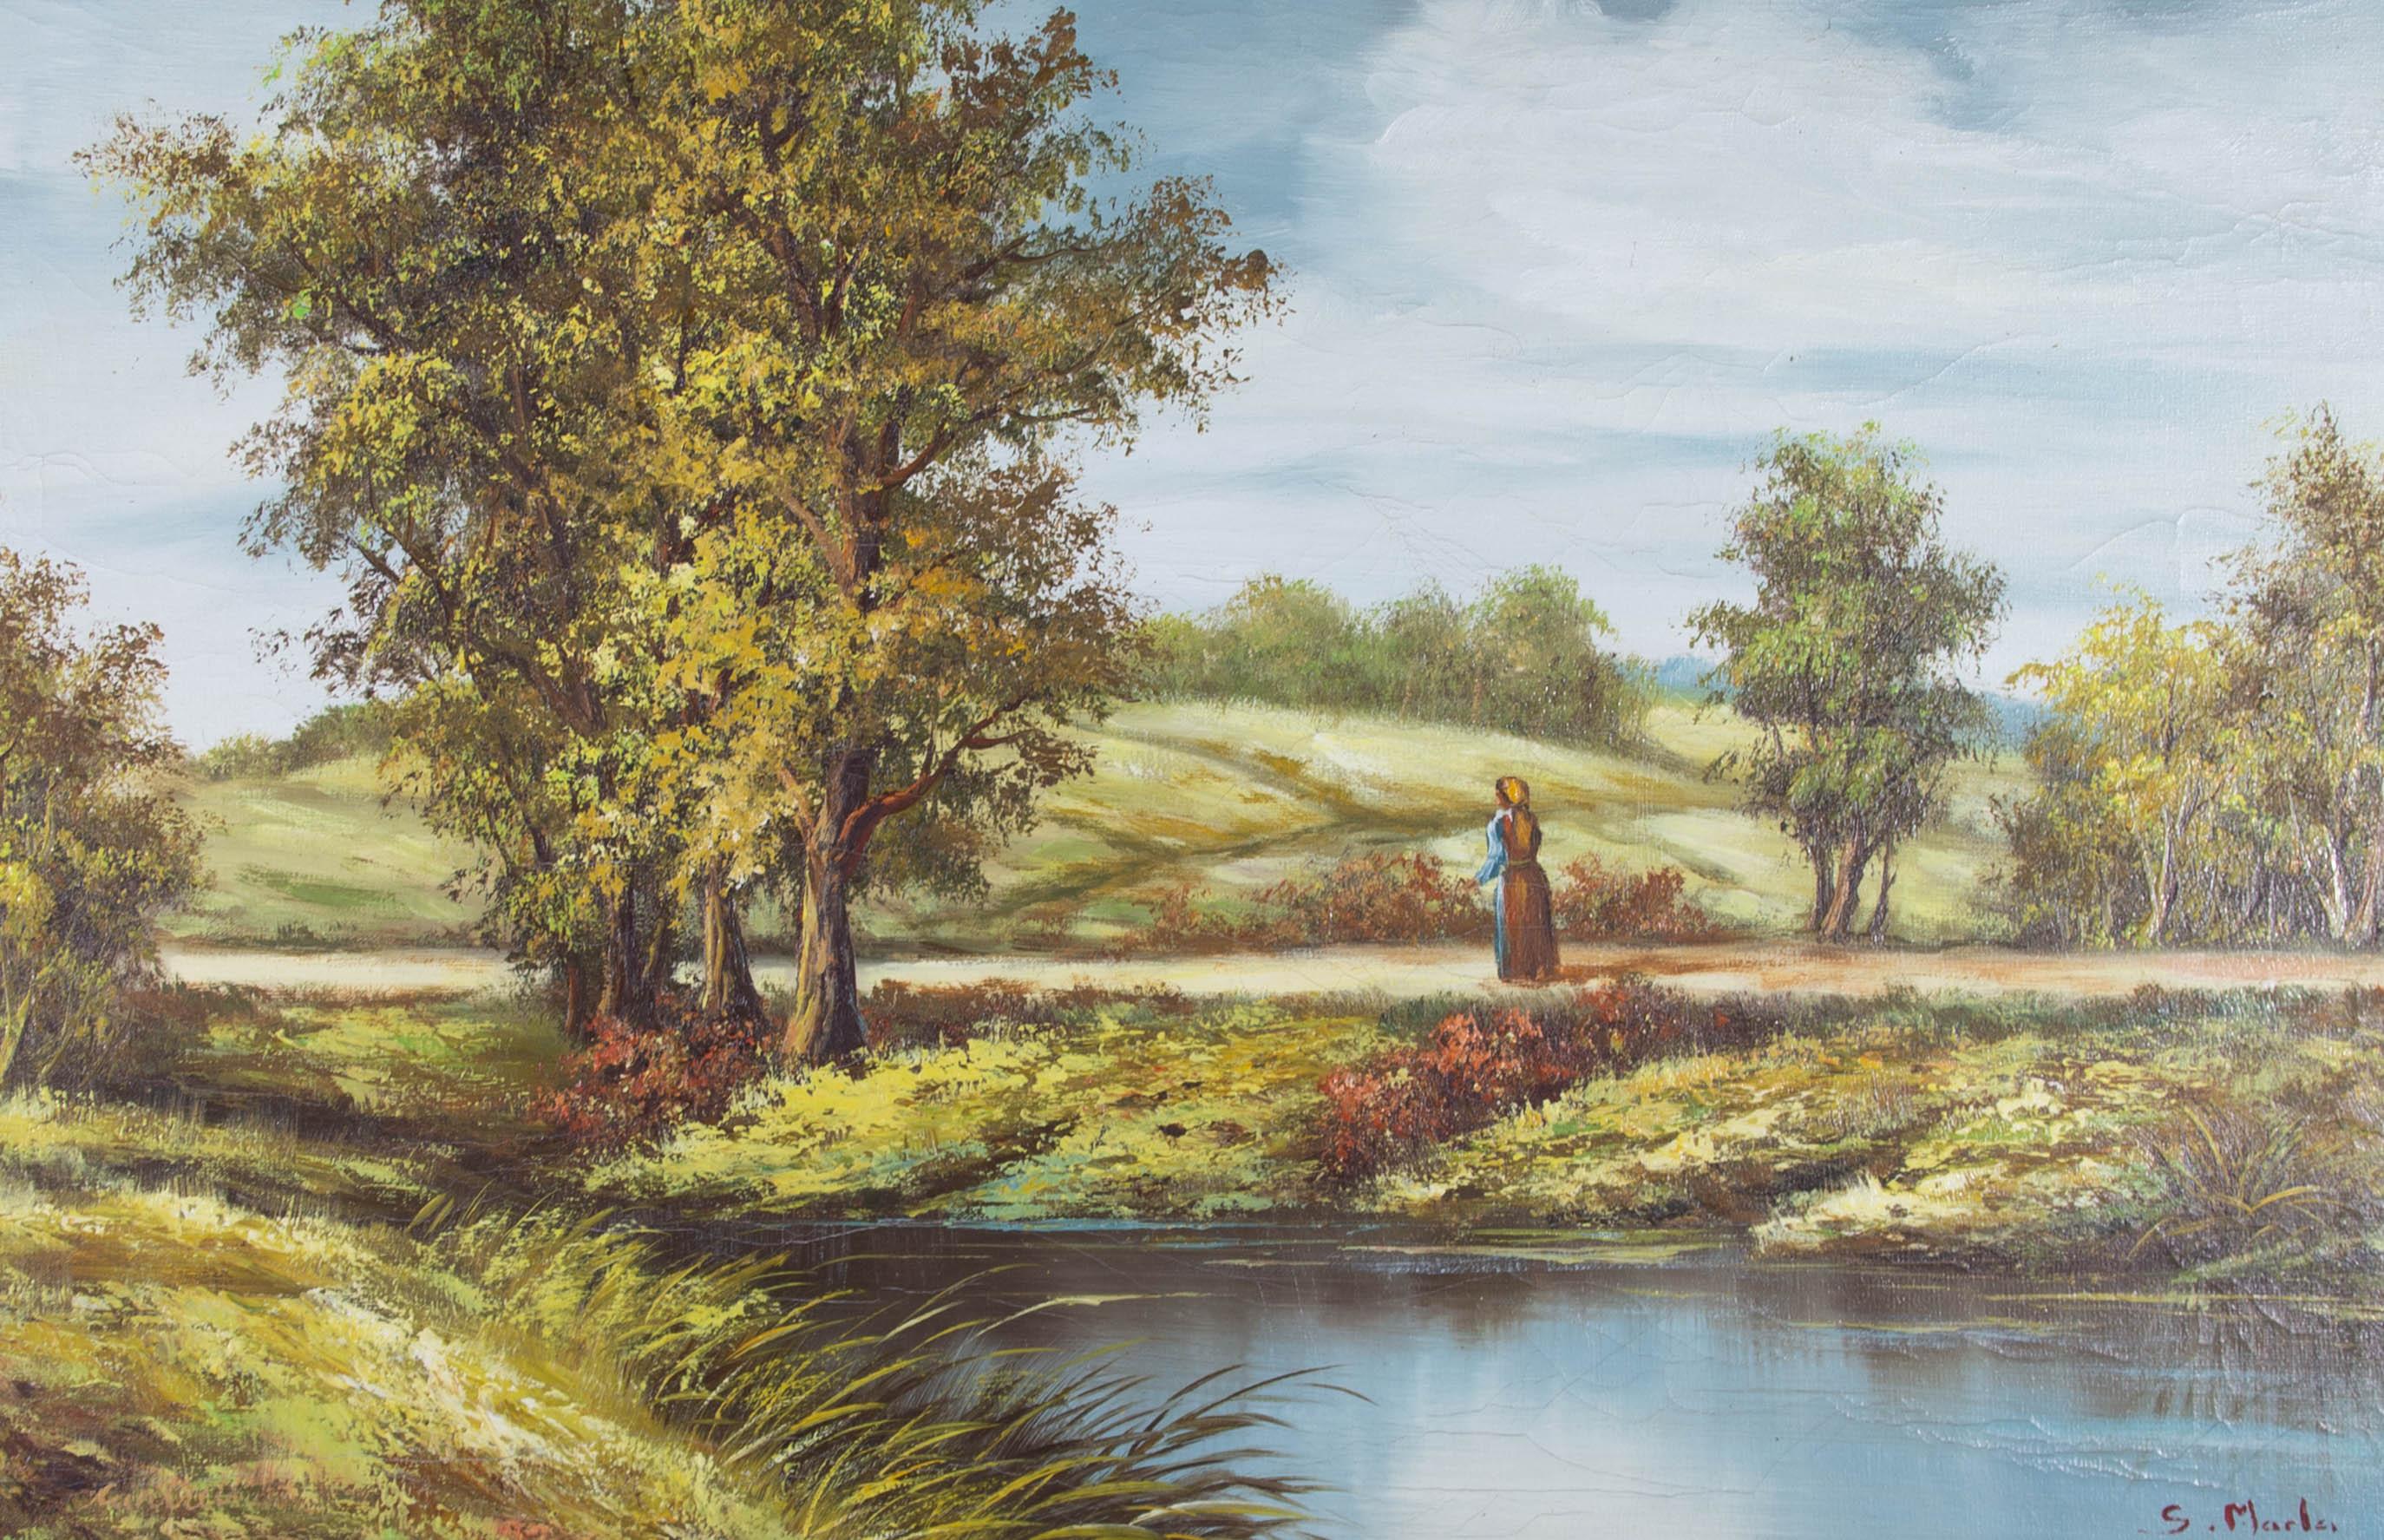 A charming oil painting by S. Marla, depicting a rural landscape scene with a figure. Signed to the lower right-hand corner. Presented in a gilt-effect slip and in distressed, wood-effect frame. On canvas on stretchers.
